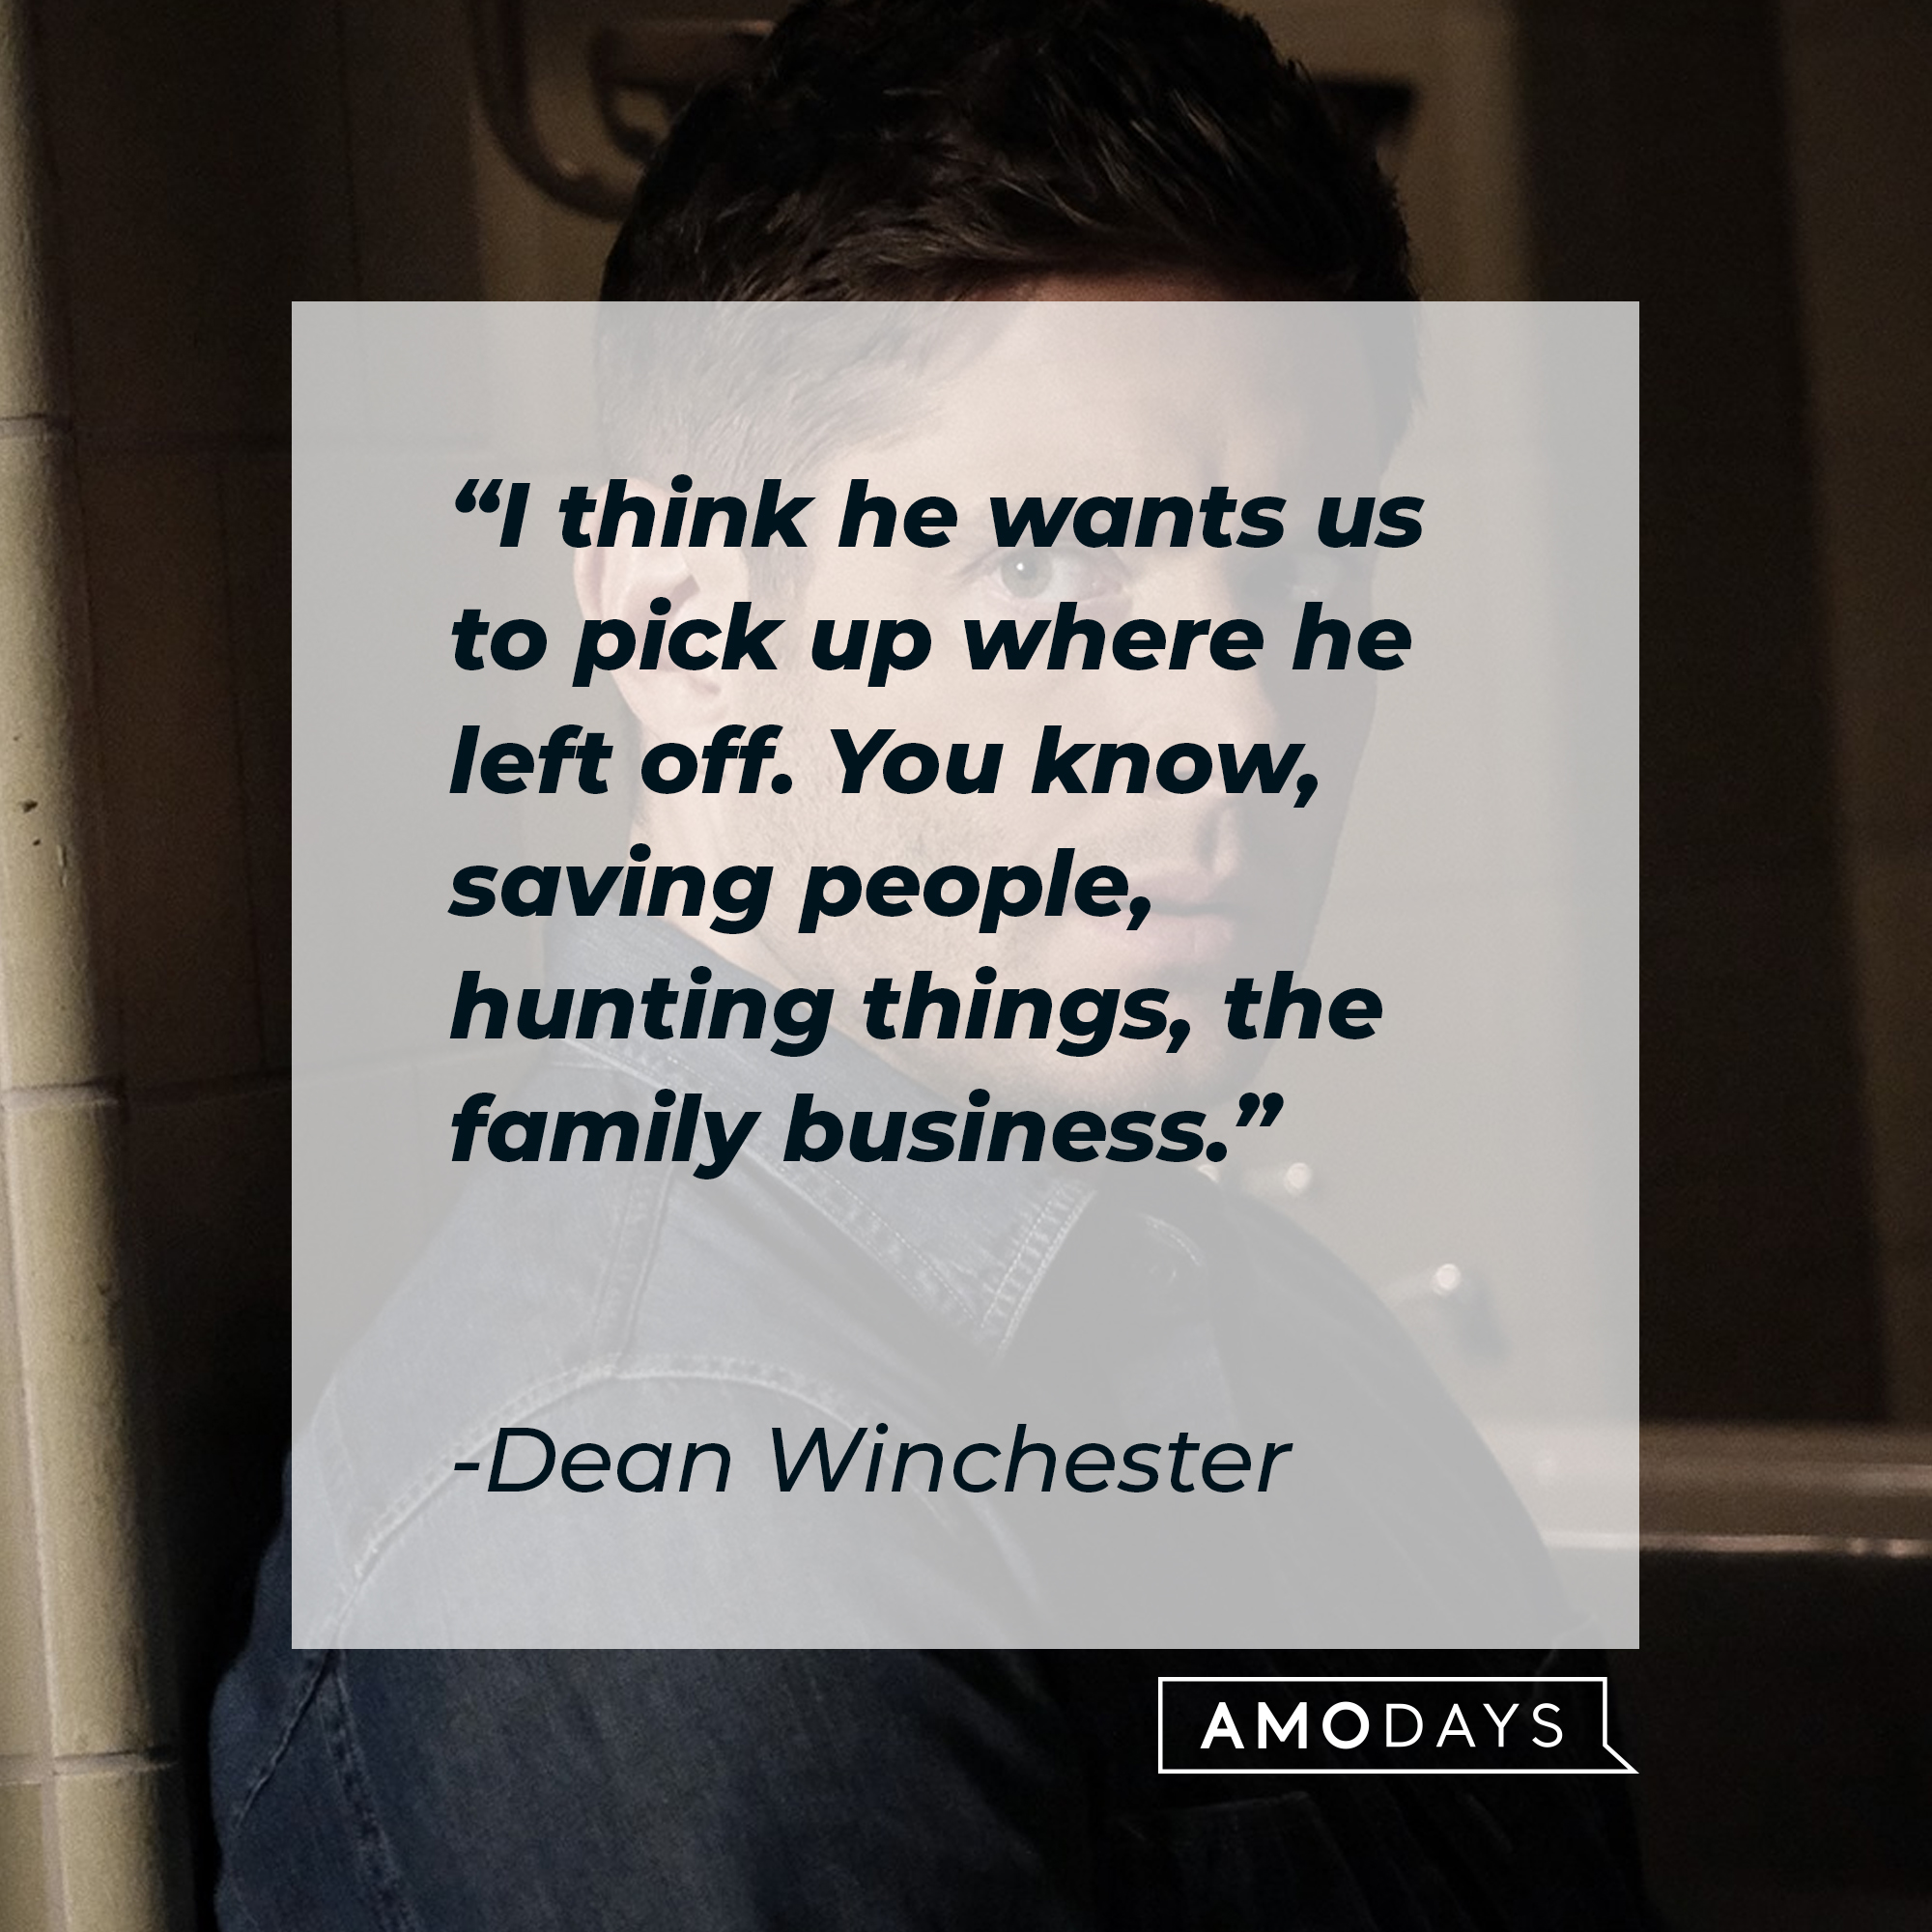 Dean Winchester's quote: "I think he wants us to pick up where he left off. You know, saving people, hunting things, the family business." | Source: facebook.com/Supernatural